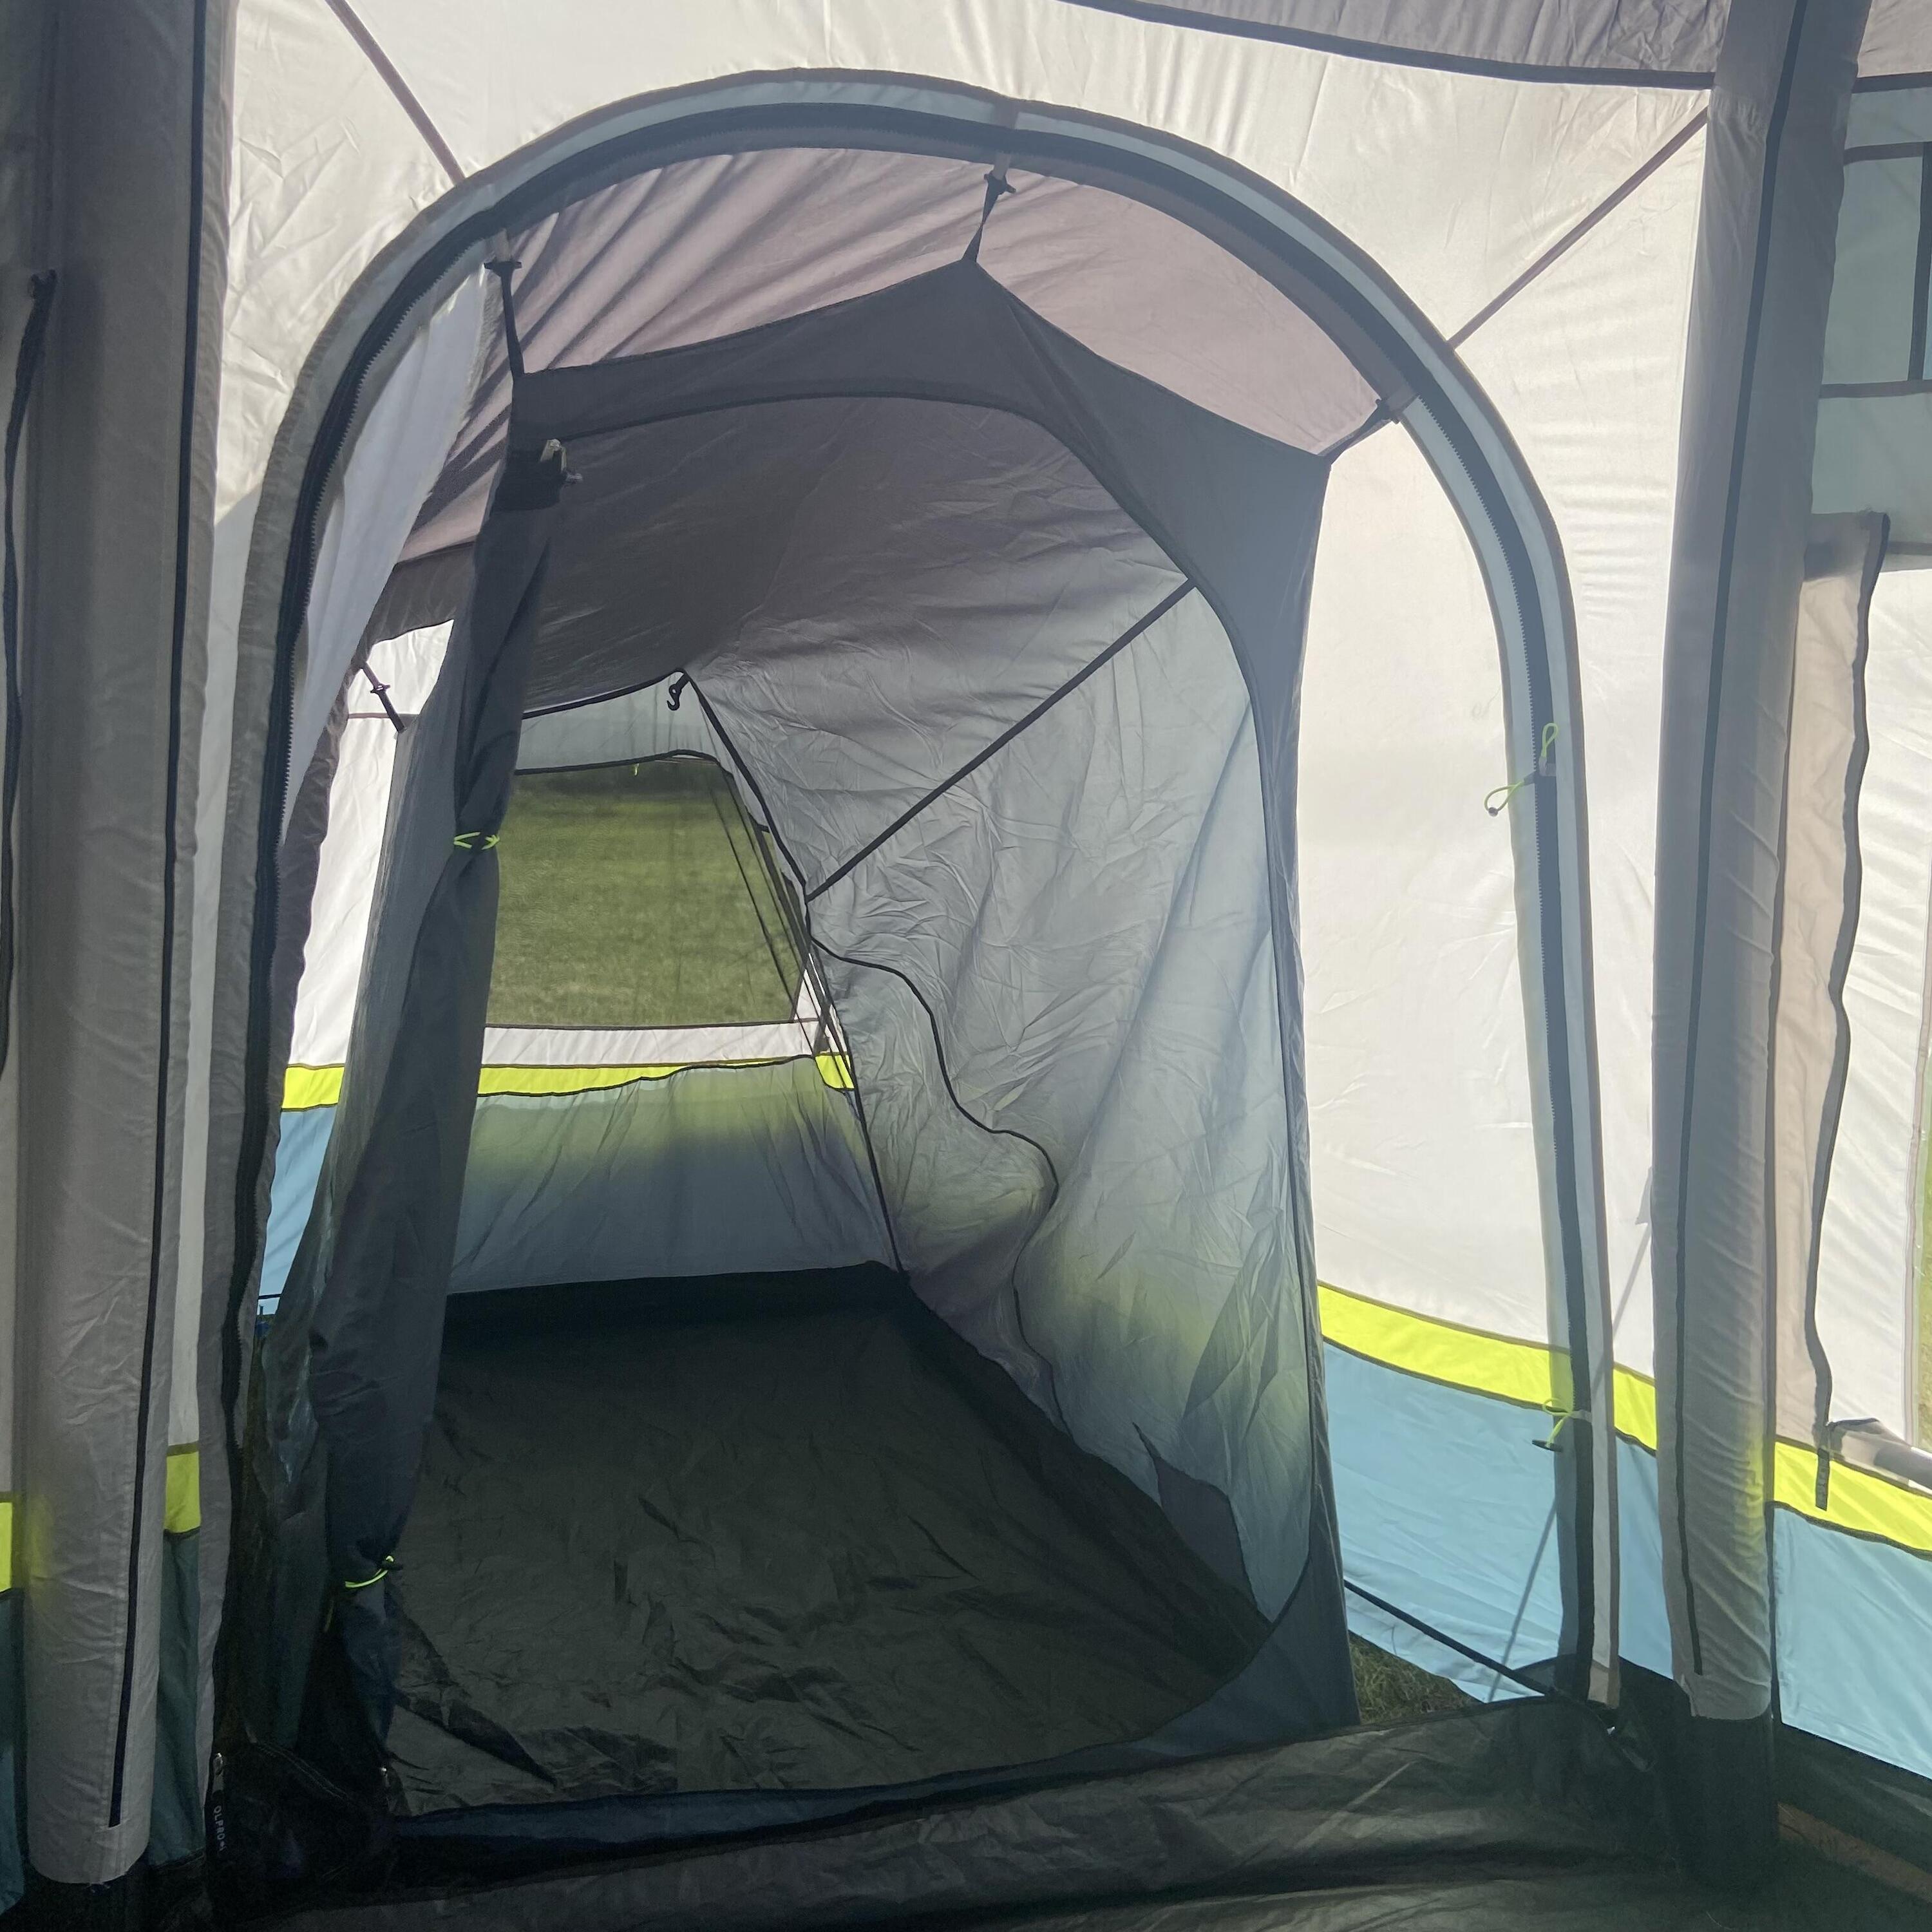 OLPRO Hive Breeze - Inflatable Campervan Awning (With Sleeping Pod) 7/7